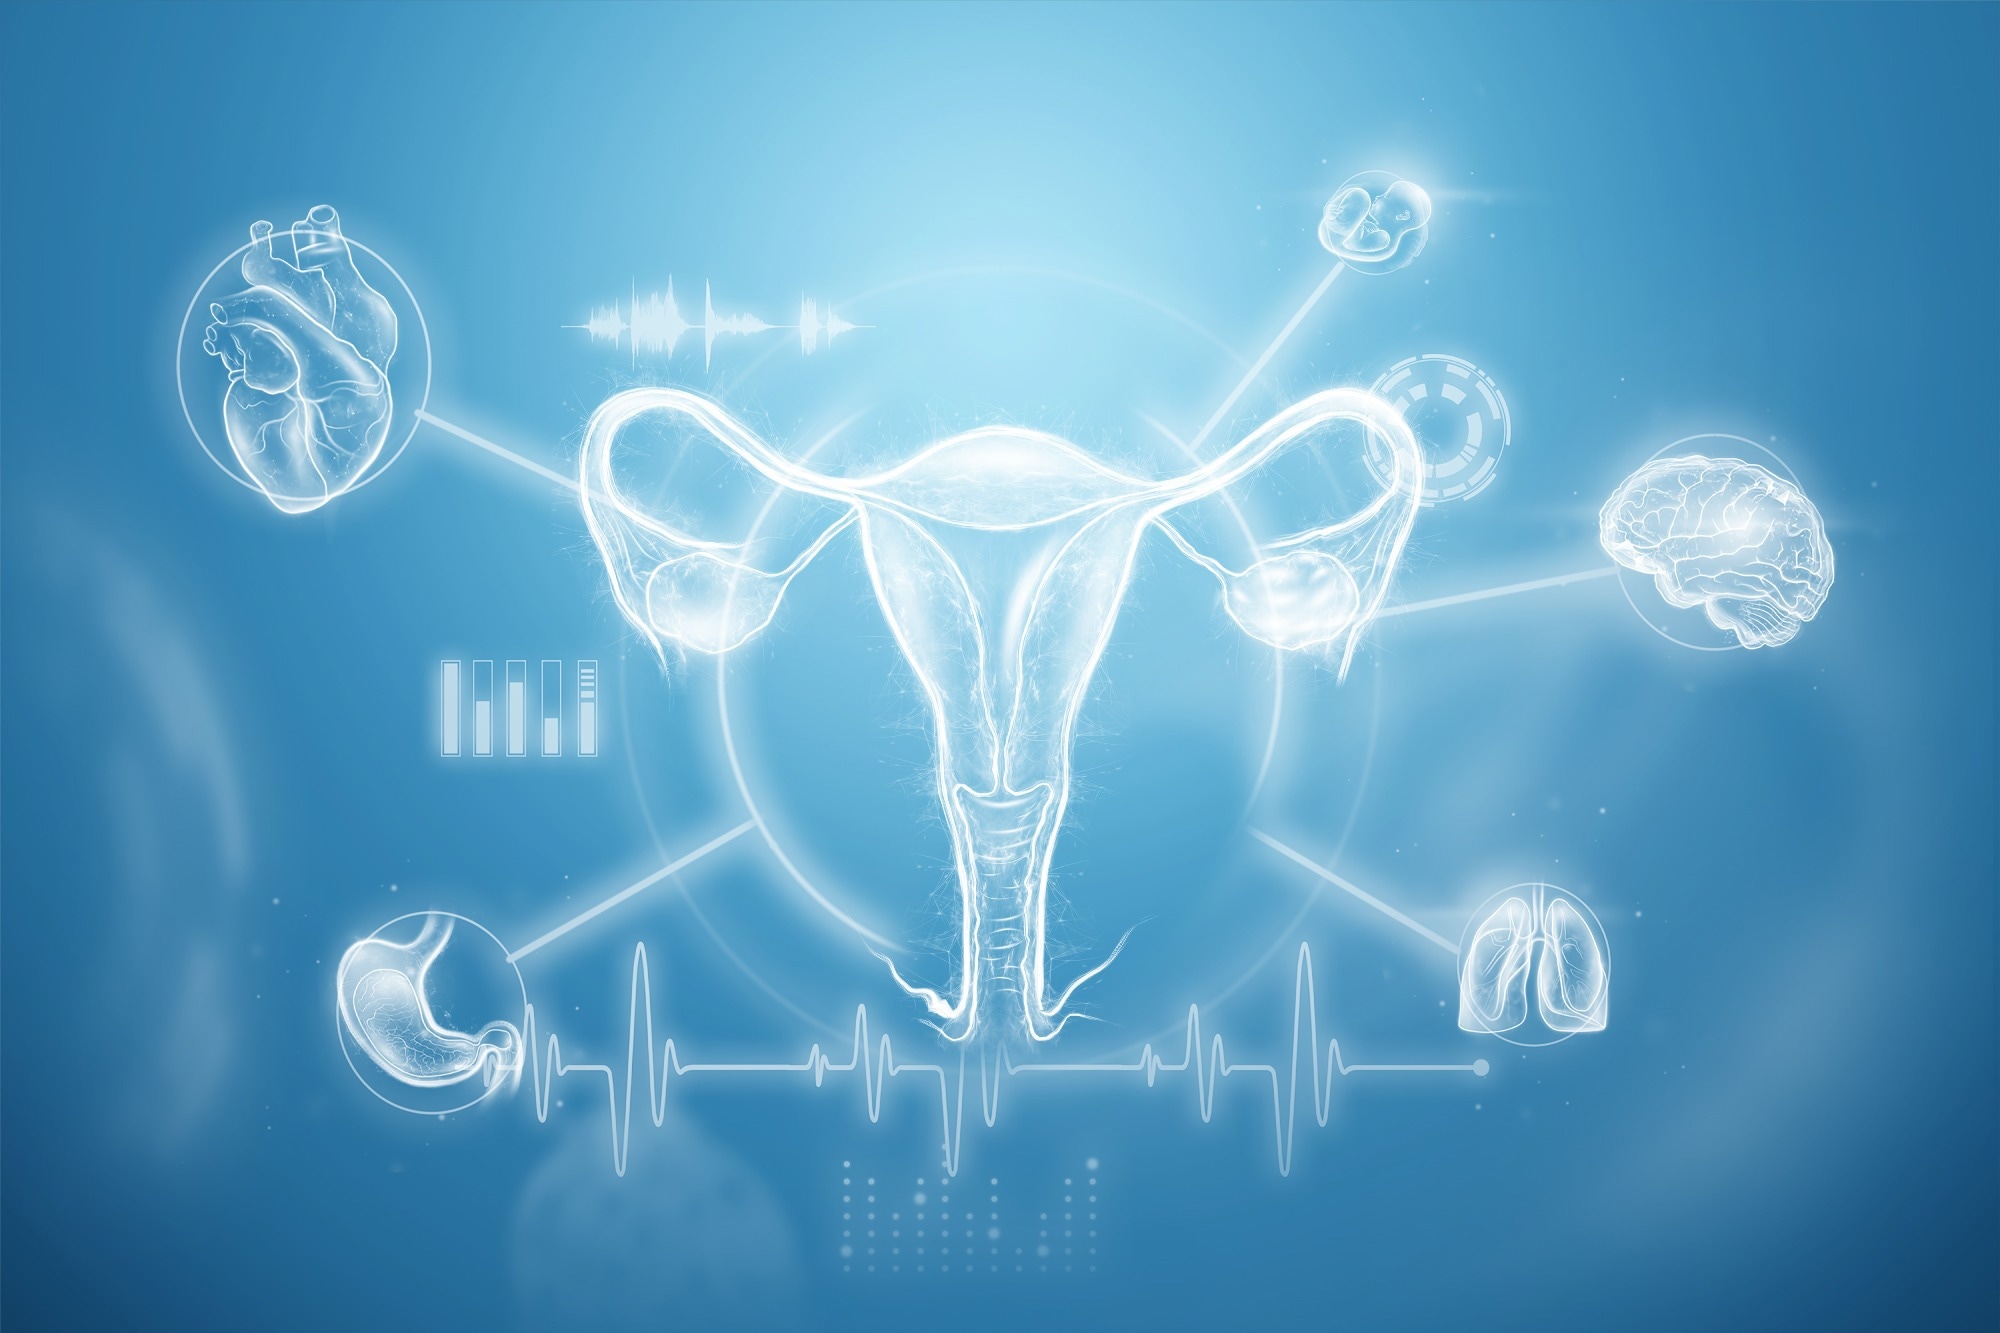 Study: Minerals and the Menstrual Cycle: Impacts on Ovulation and Endometrial Health. Image Credit: Marko Aliaksandr / Shutterstock.com